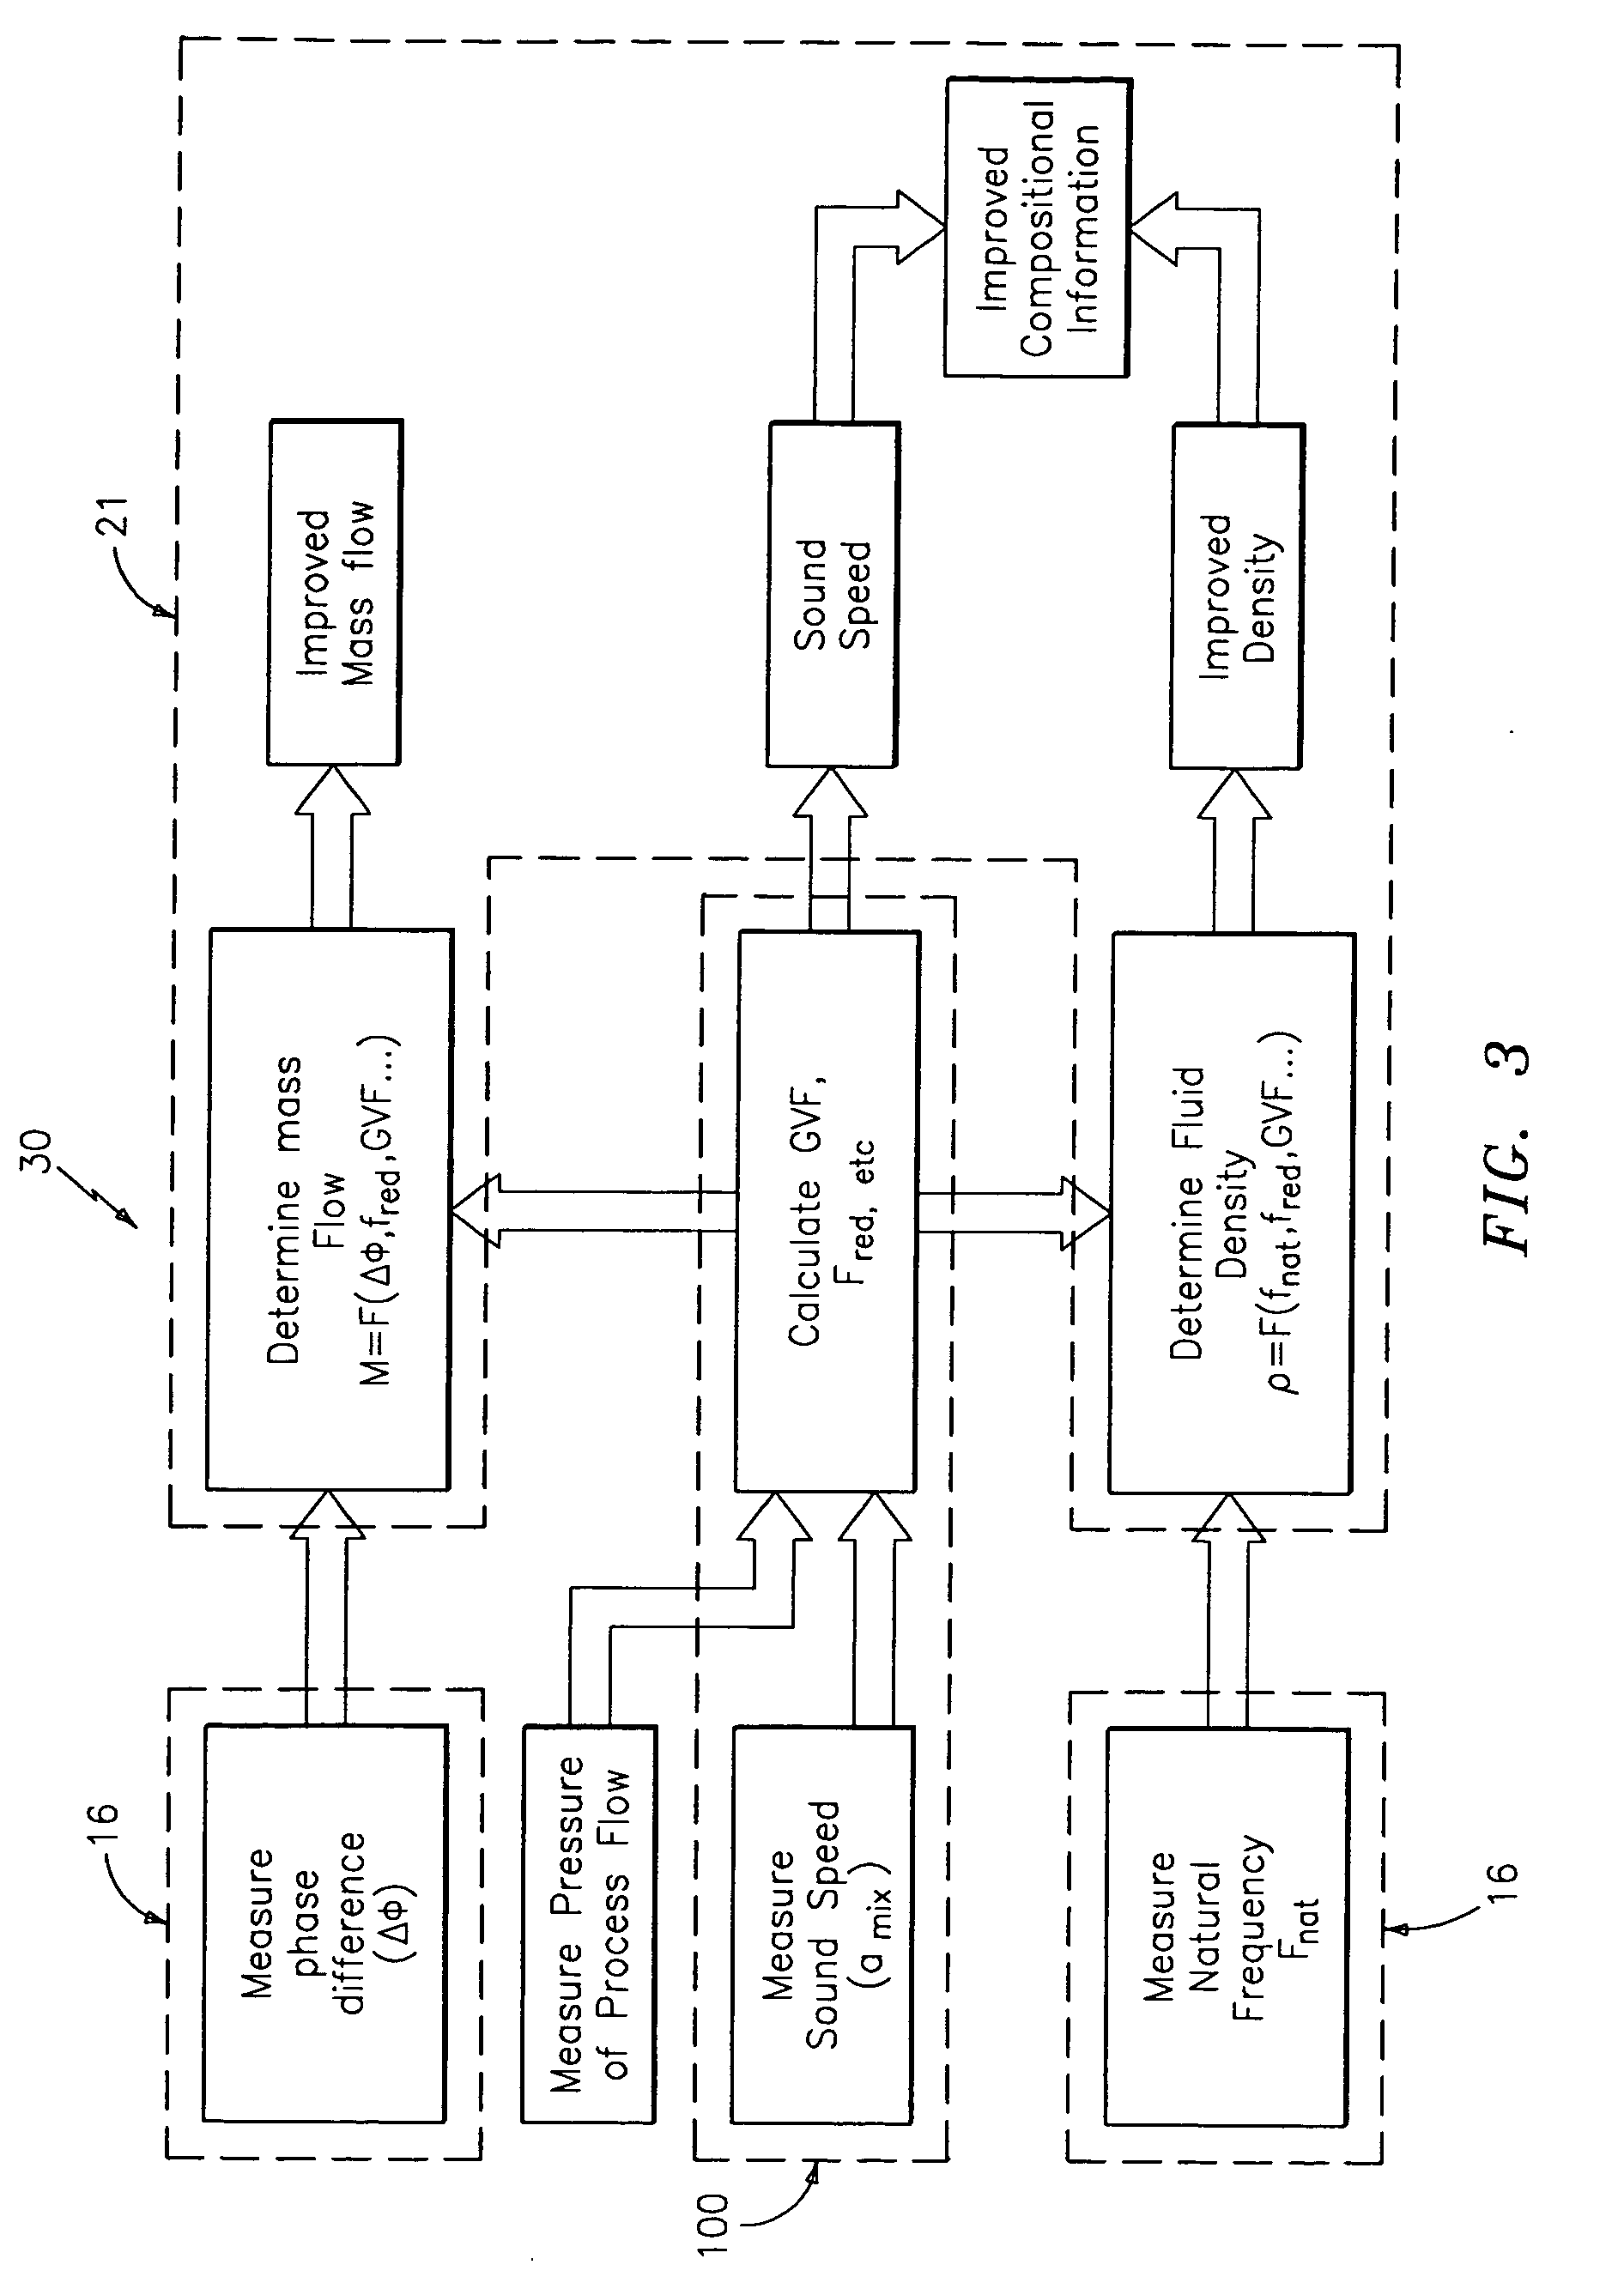 Apparatus and method for augmenting a Coriolis meter